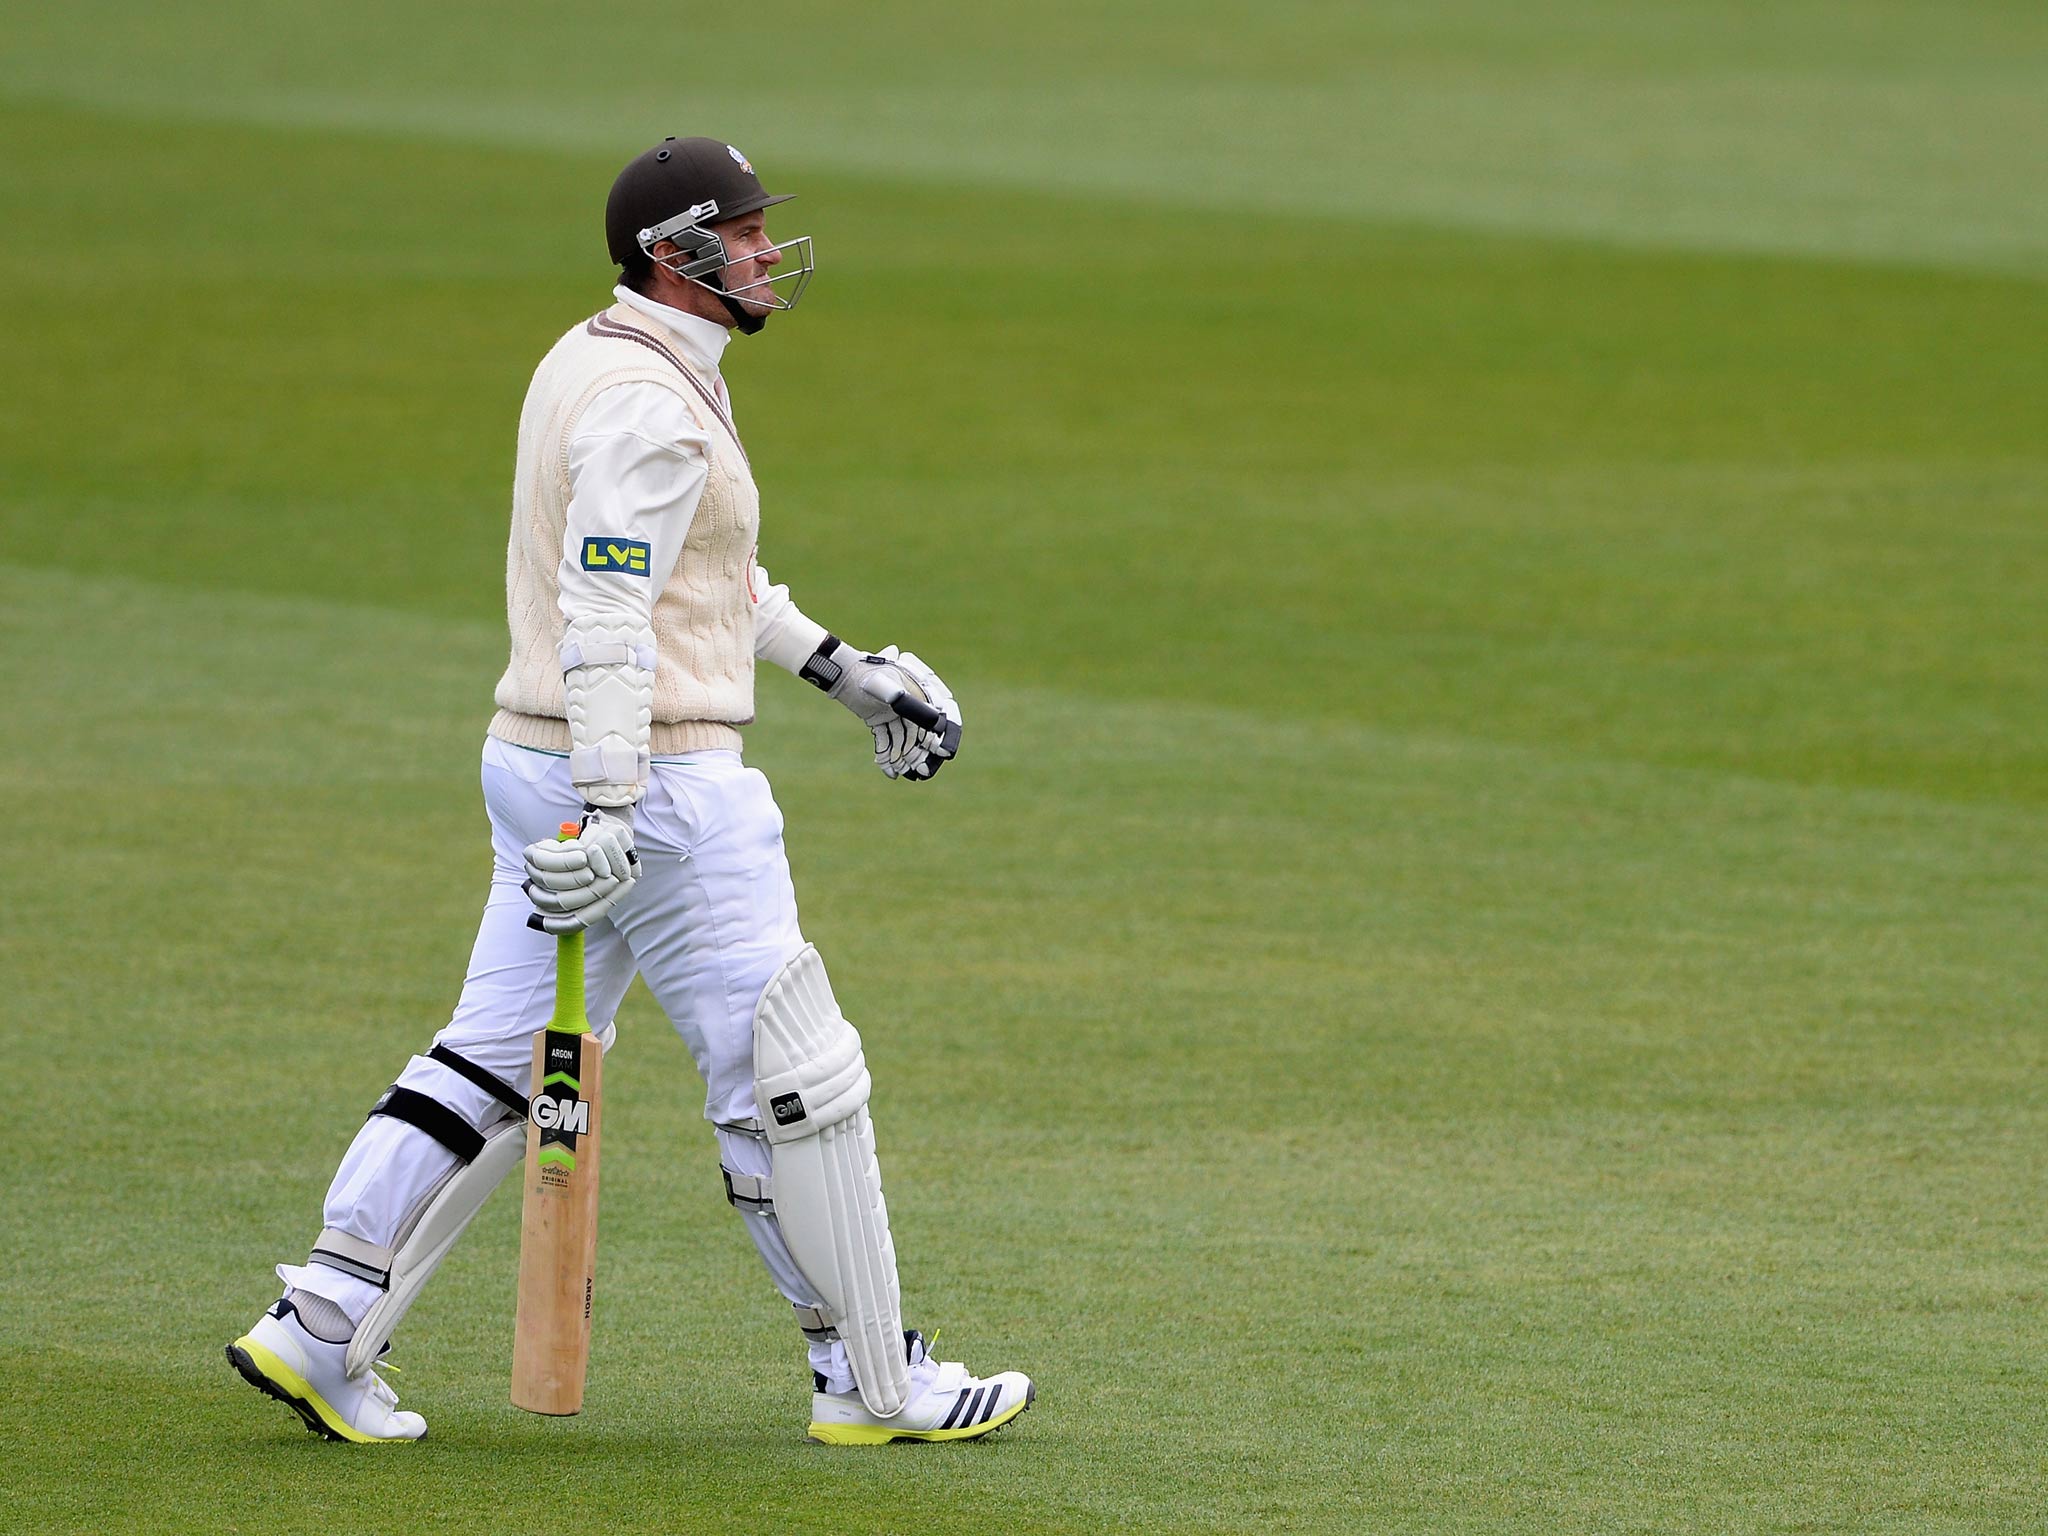 Graeme Smith of Surrey makes his way back to the pavilion having been dismissed for two